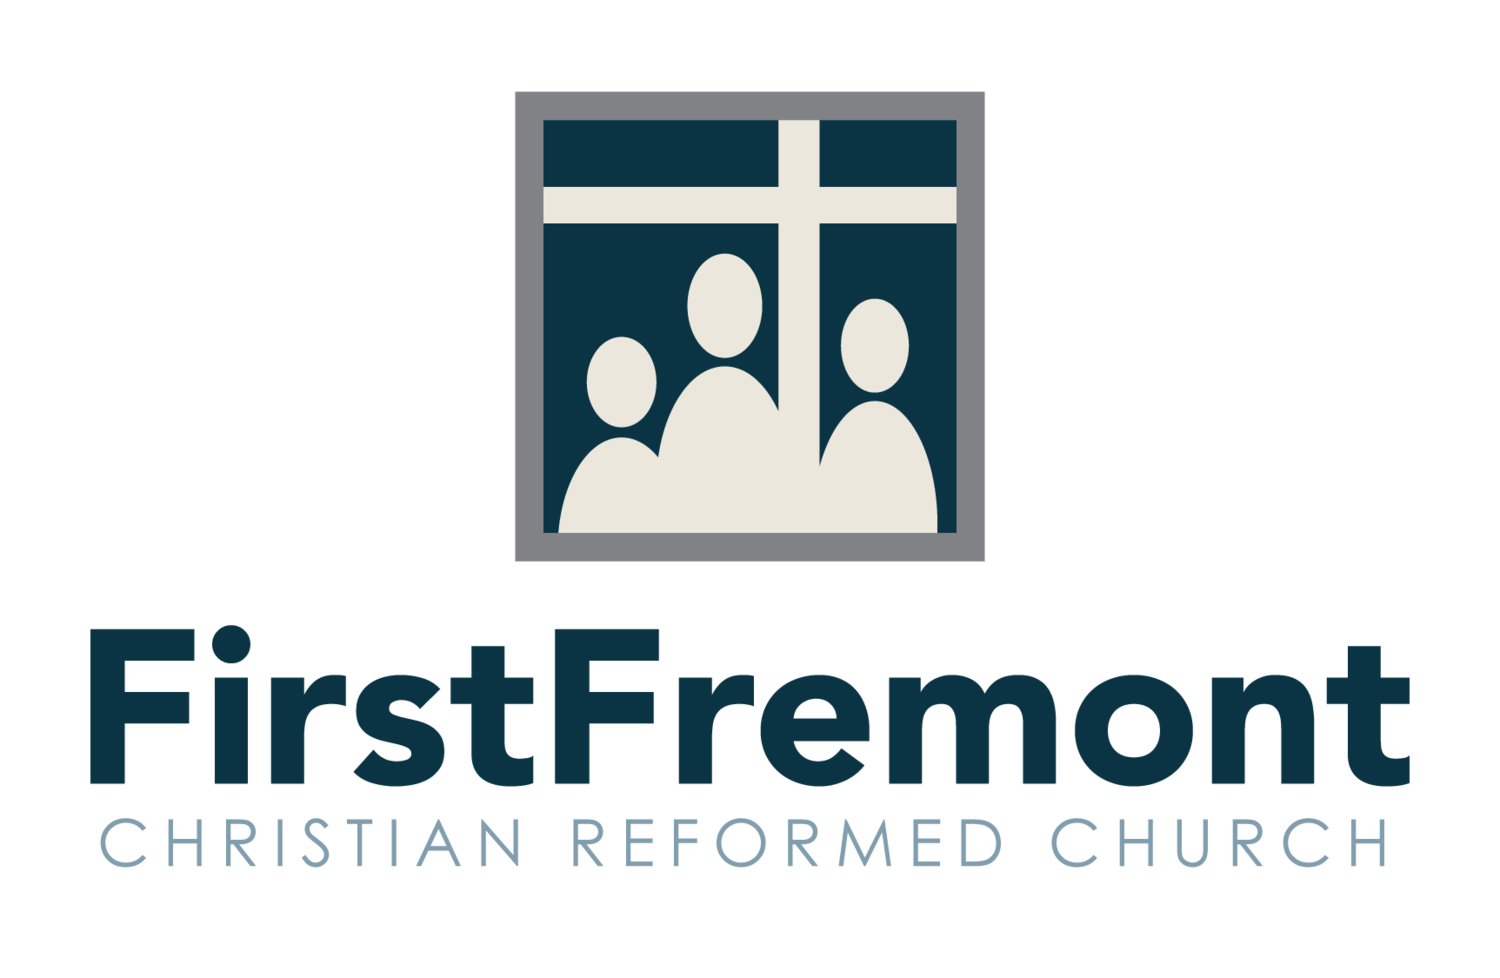 First Fremont Christian Reformed Church